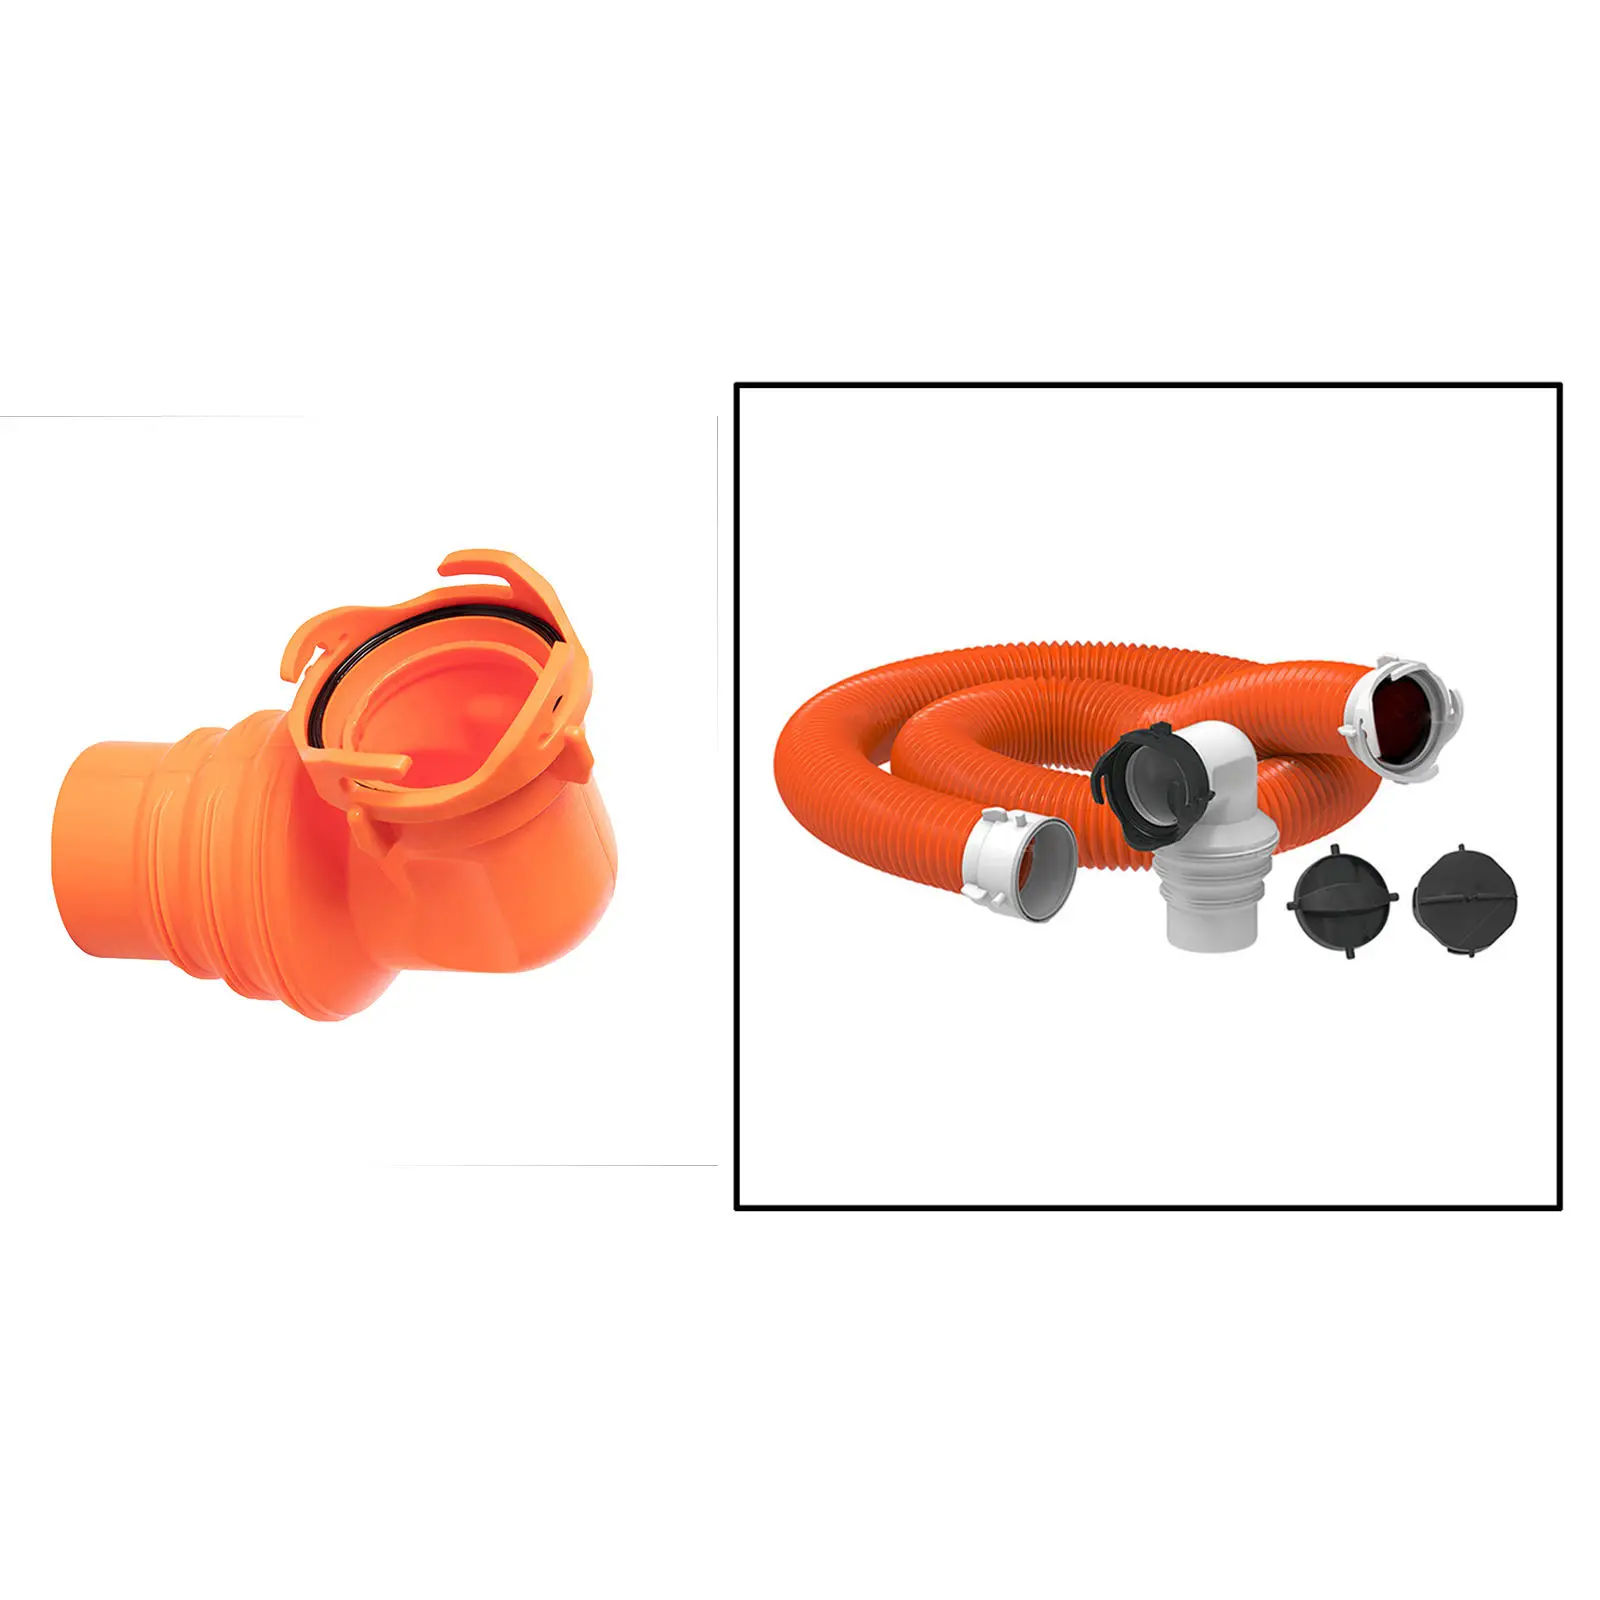 90 Degree RV Sewer Hose Swivel Elbow Fitting Adapter for 3